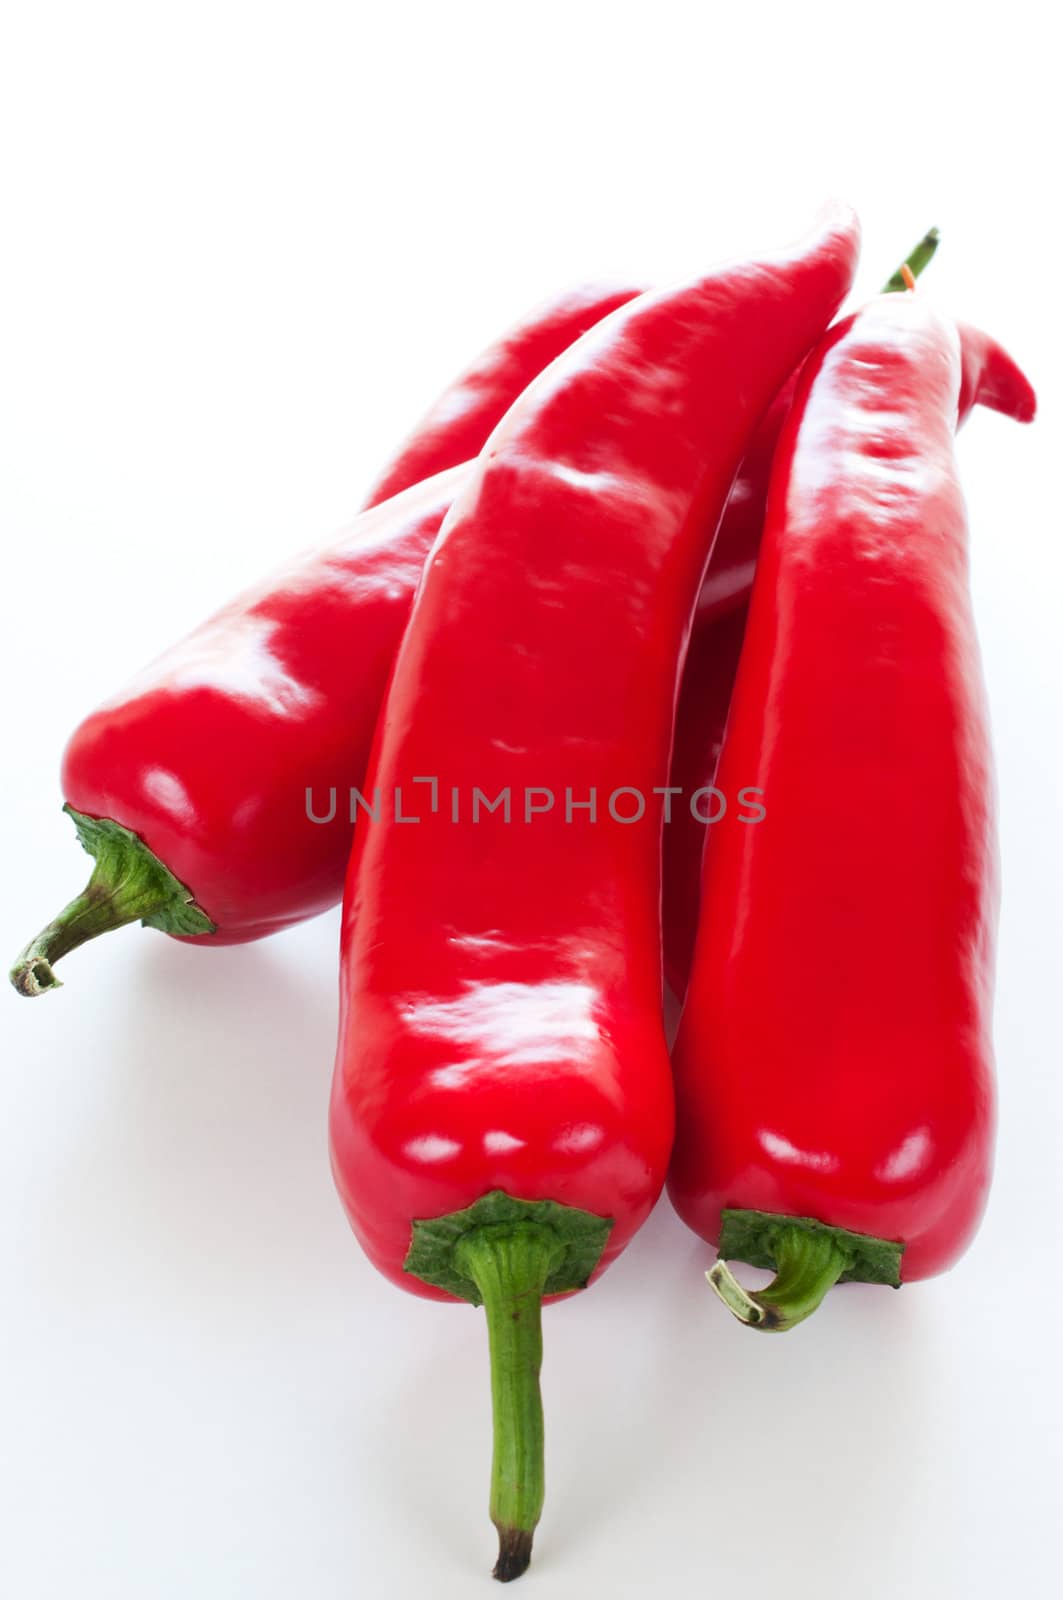 Bundle paprika peppers on white background close up